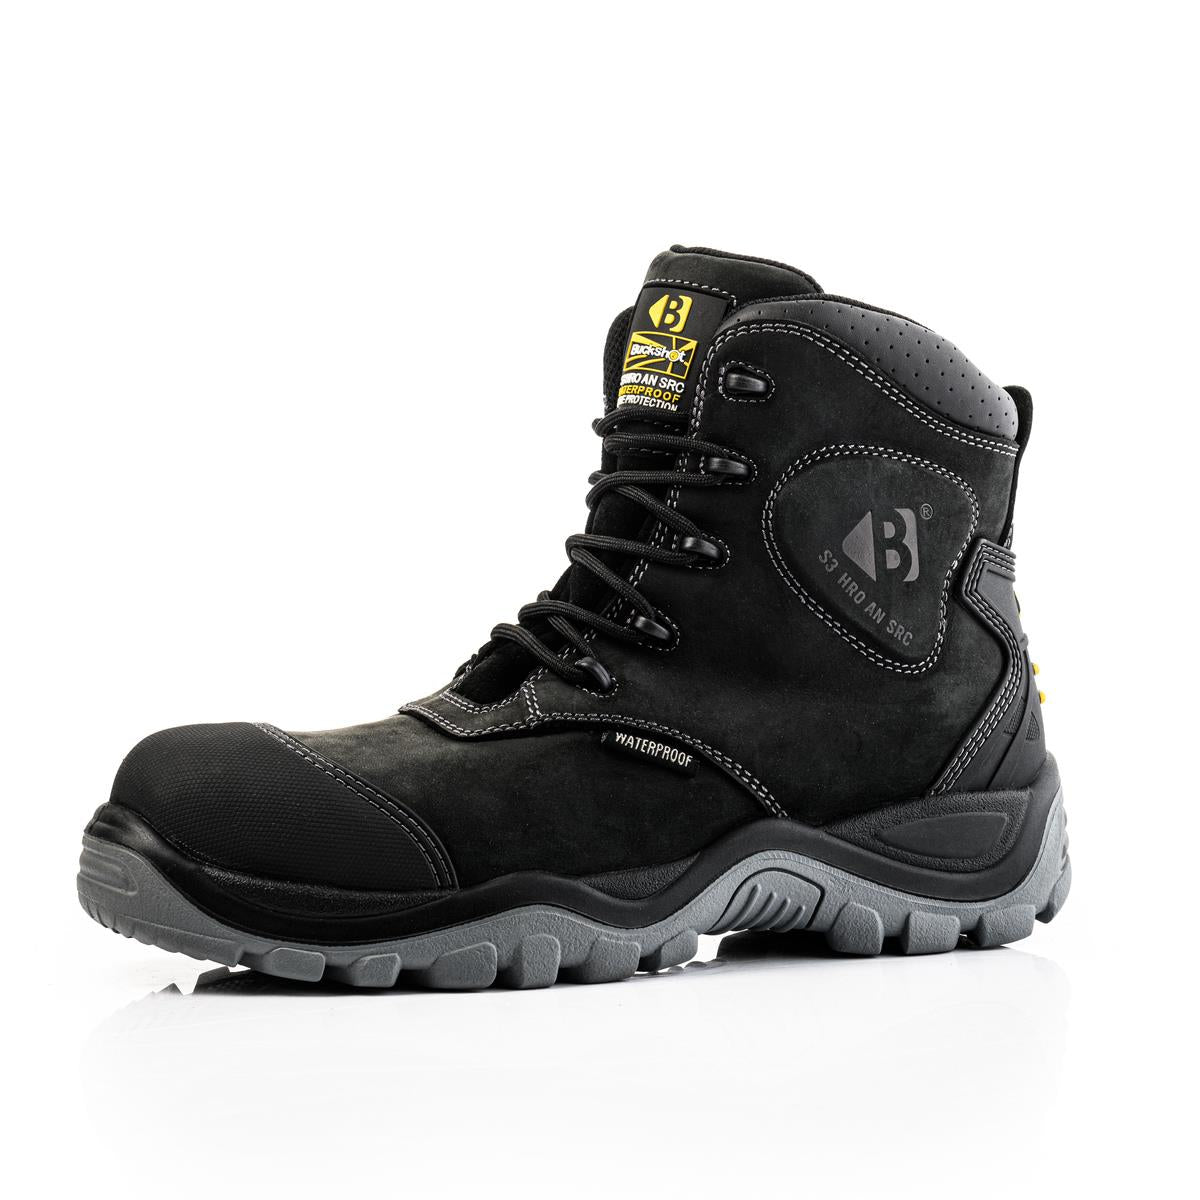 Buckbootz S3 black ankle protection waterproof composite toe/midsole work safety boot #BSH012